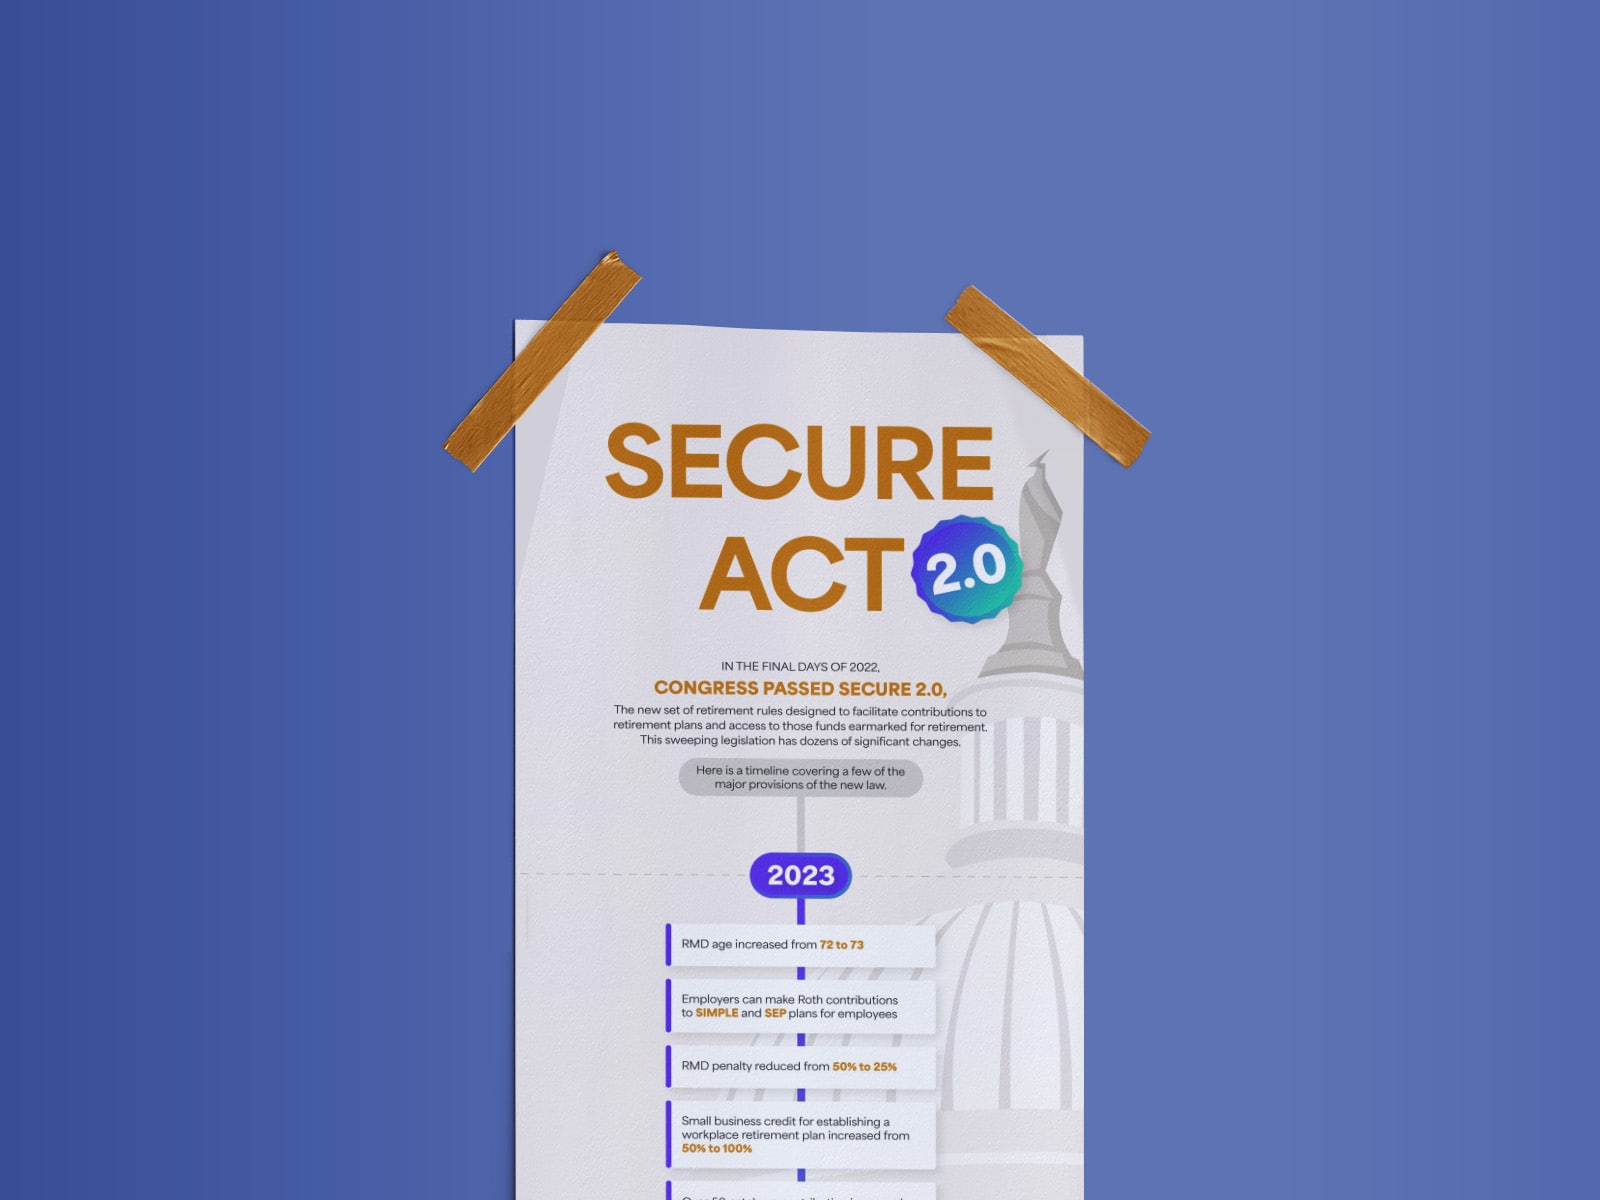 Understanding the SECURE Act 2.0